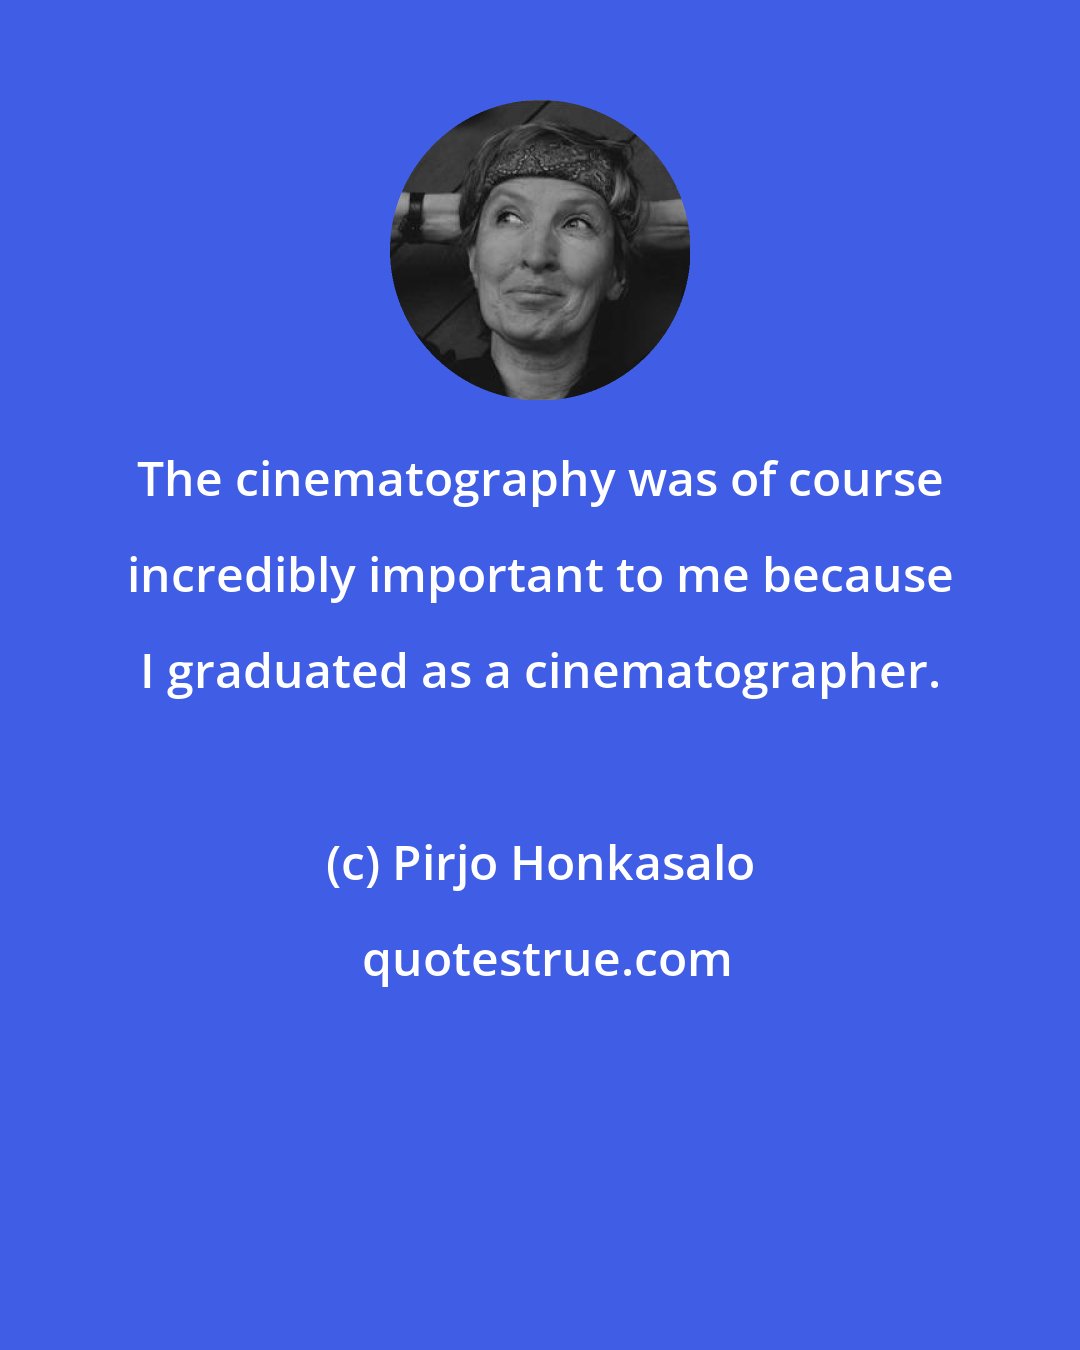 Pirjo Honkasalo: The cinematography was of course incredibly important to me because I graduated as a cinematographer.